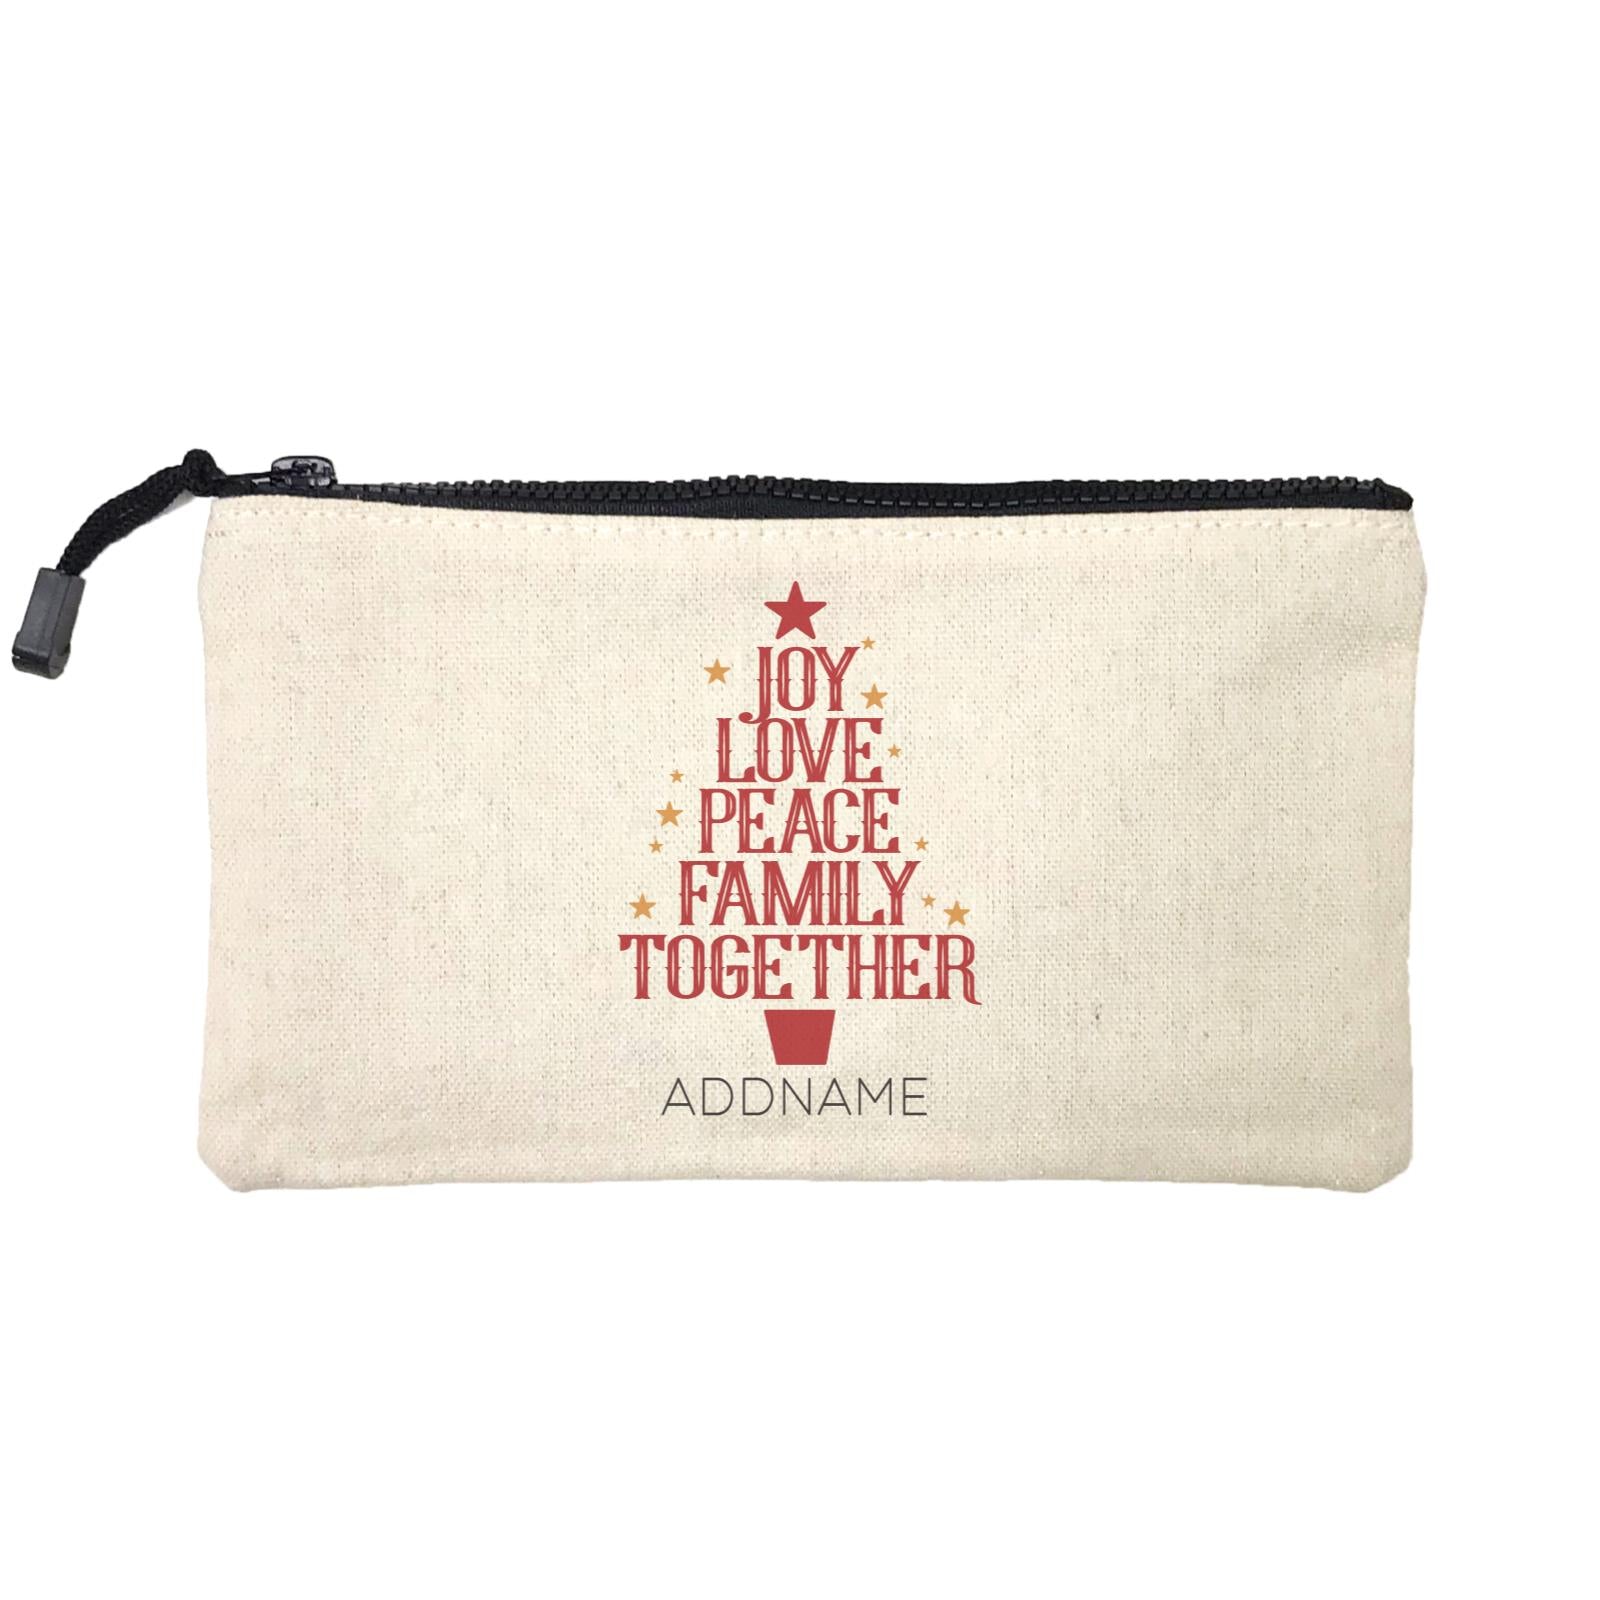 Xmas Joy Love Peace Family Together Mini Accessories Stationery Pouch